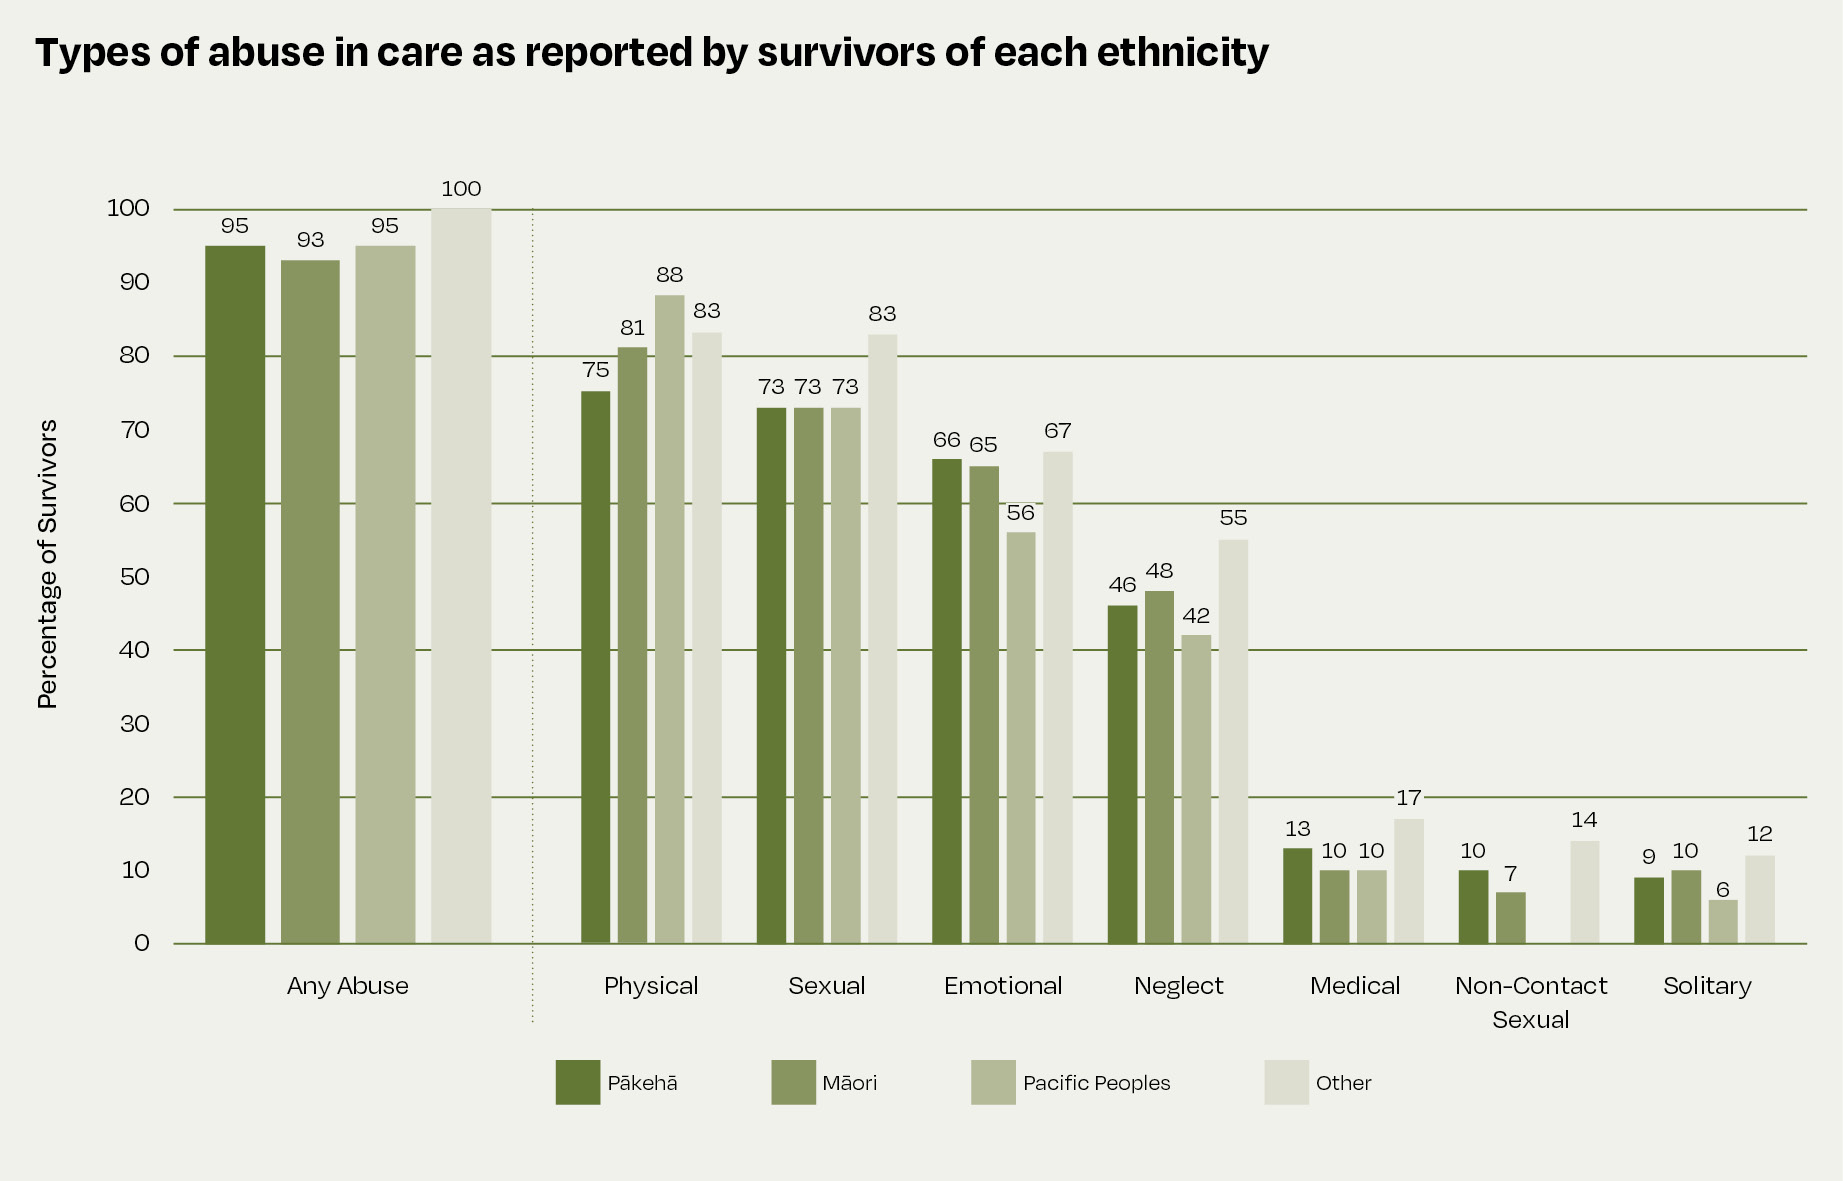 This graph shows showing types of abuse in care as experienced by each ethnicity. Ethnicities are listed as Pākehā, Māori, Pacific Peoples and other. Types of abuse are listed in the order they were most likely to be experienced: any abuse, physical, sexual, emotional, neglect, medical, non-contact sexual, and solitary. Any abuse was experienced by 95 percent of Pākehā, 93 percent of Māori, 95 percent of Pacific Peoples and 100 percent of other ethnicities. Physical abuse was experienced by 75 percent of Pākehā, 81 percent of Māori, 88 percent of Pacific Peoples and 83 percent of other ethnicities. Sexual abuse was experienced by 73 percent of Pākehā and Māori survivors and Pacific Peoples and 83 percent of other ethnicities. Emotional abuse was experienced by 66 percent of Pākehā, 65 percent of Māori, 56 percent of Pacific Peoples and 67 percent of other ethnicities. Neglect was experienced by 46 percent of Pākehā, 48 percent of Māori, 42 percent of Pacific Peoples and 55 percent of other ethnicities. Medical   abuse was experienced by 13 percent of Pākehā, 10 percent of Māori and Pacific Peoples and 17 percent of other ethnicities. Non-contact sexual abuse was experienced by 10 percent of Pākehā, 7 percent of Māori and 14 percent of other ethnicities. Pacific Peoples did not report non-contact sexual abuse. Solitary confinement was experienced by 9 percent of Pākehā, 10 percent of Māori, 6 percent of Pacific Peoples, and 12 percent of other ethnicities. 